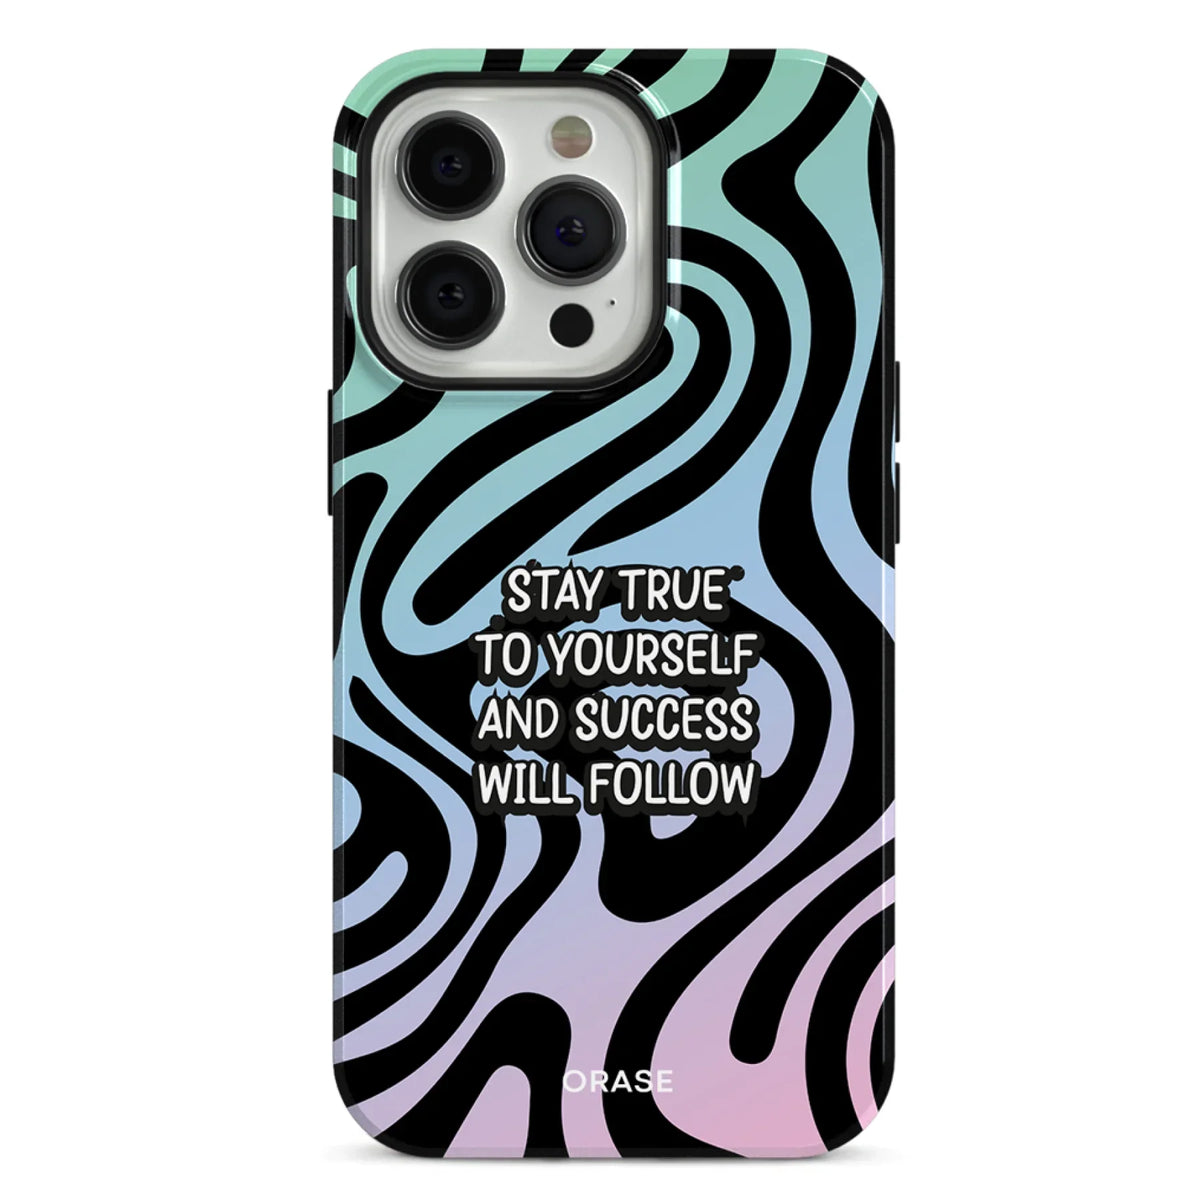 Stay True to Yourself iPhone Case - iPhone 11 Pro